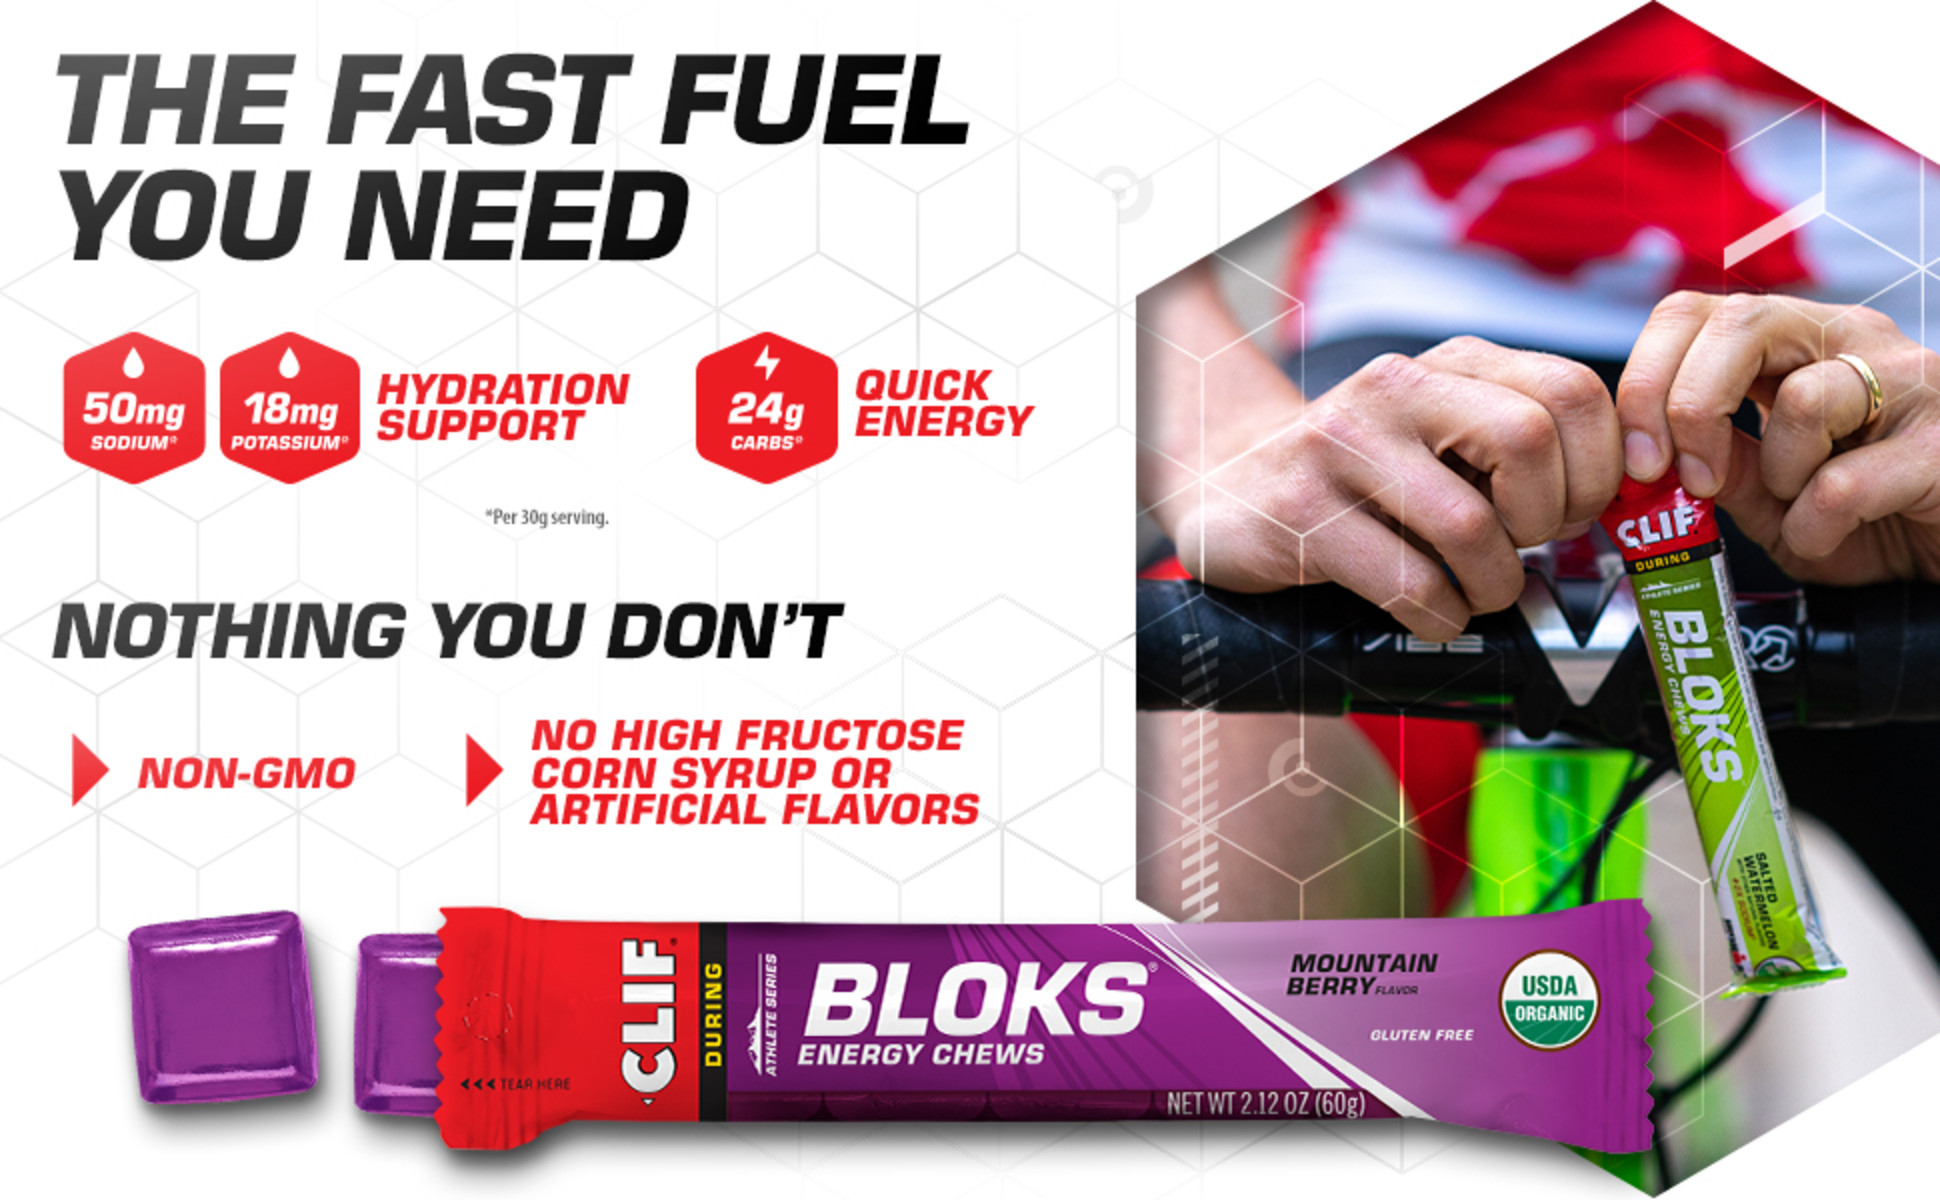 CLIF BLOKS - Mountain Berry Flavor - Energy Chews - Non-GMO - Plant Based -  Fast Fuel for Cycling and Running - Quick Carbohydrates and Electrolytes -  2.12 oz. - Walmart.com